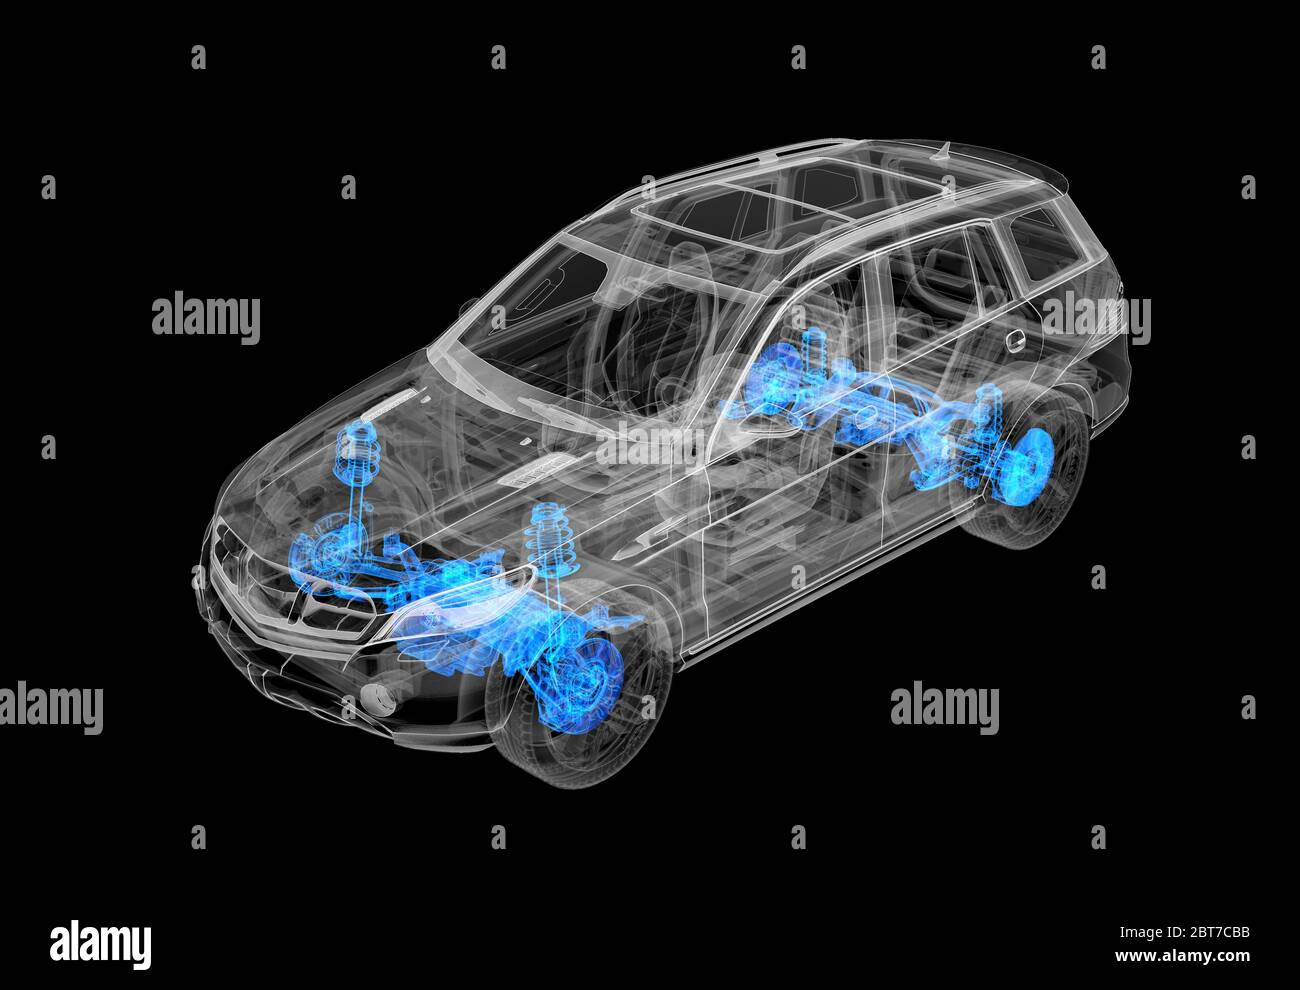 Technical 3d illustration of SUV car with x-ray effect. Brakes and suspension systems. Perspective view on black background. Stock Photo